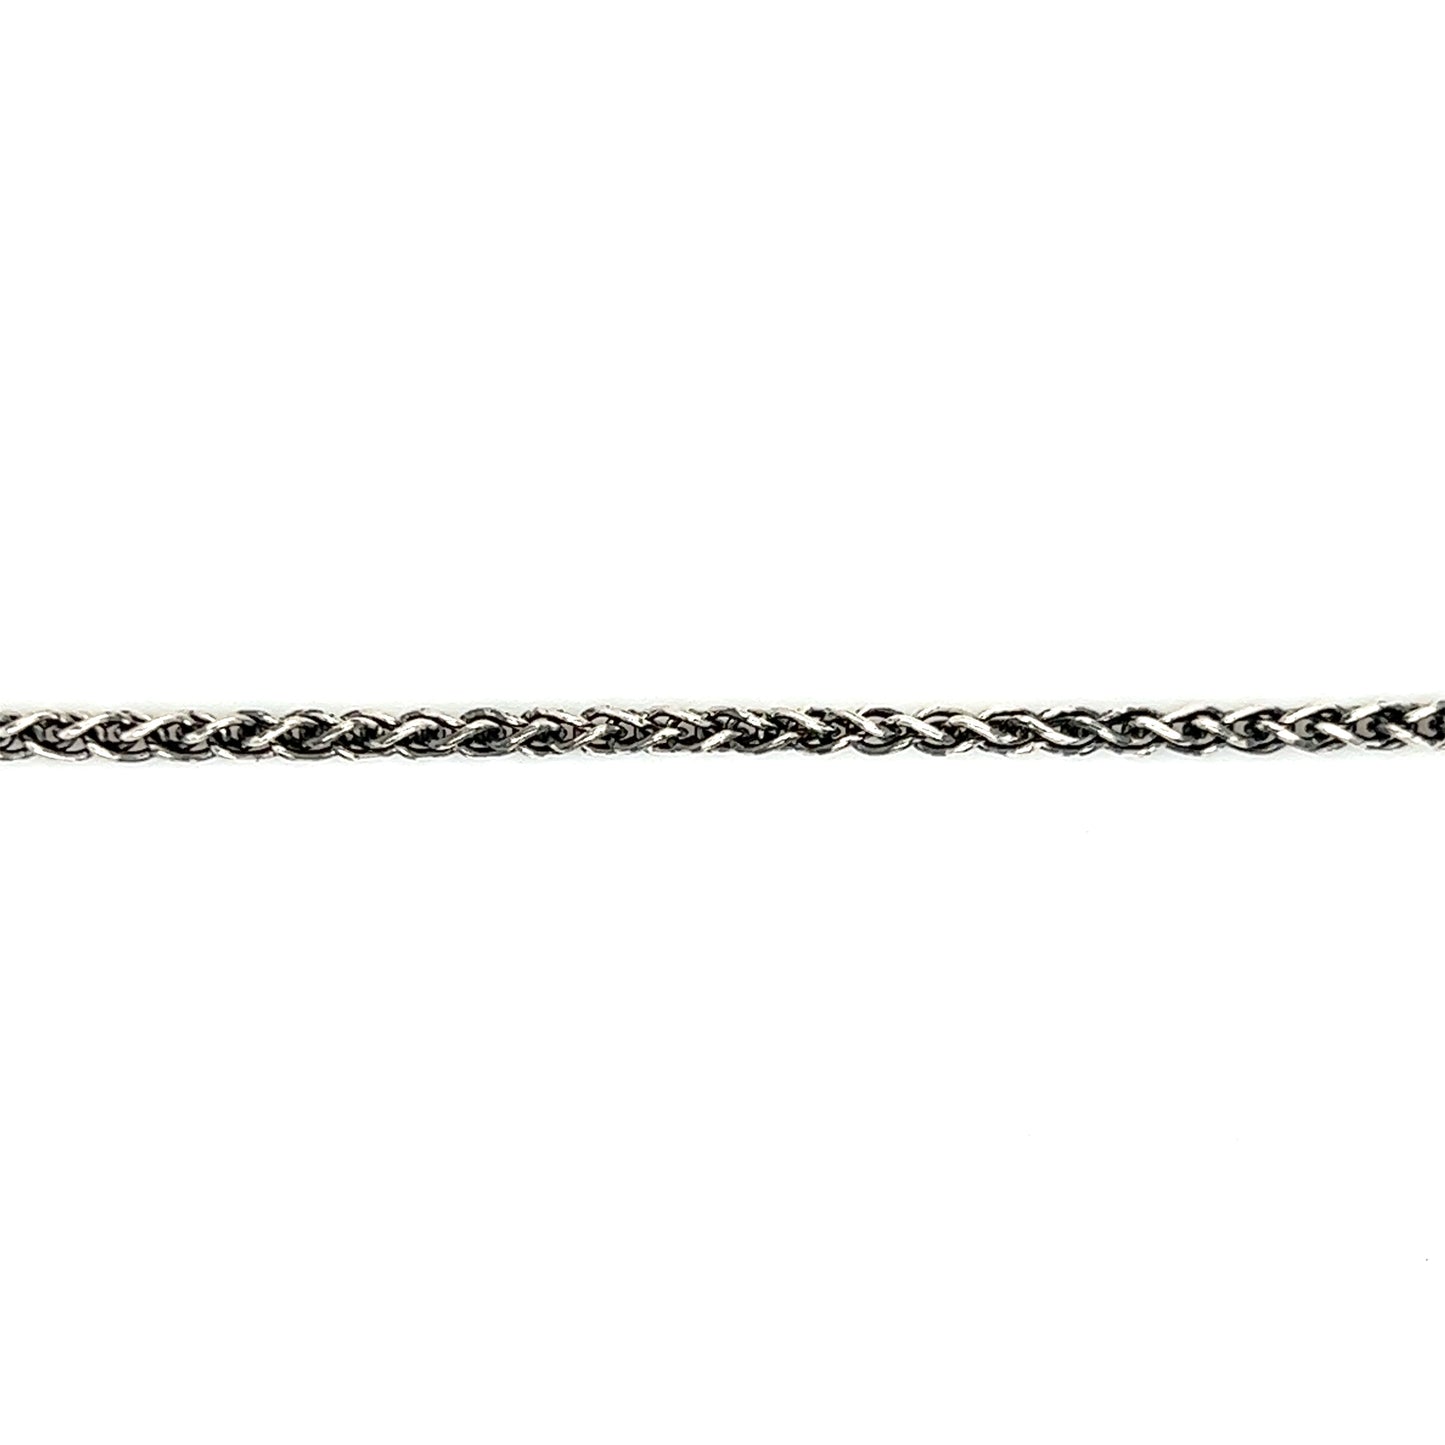 Oxidized Wheat 2.25mm Chain with 20in of Length in Sterling Silver Chain View